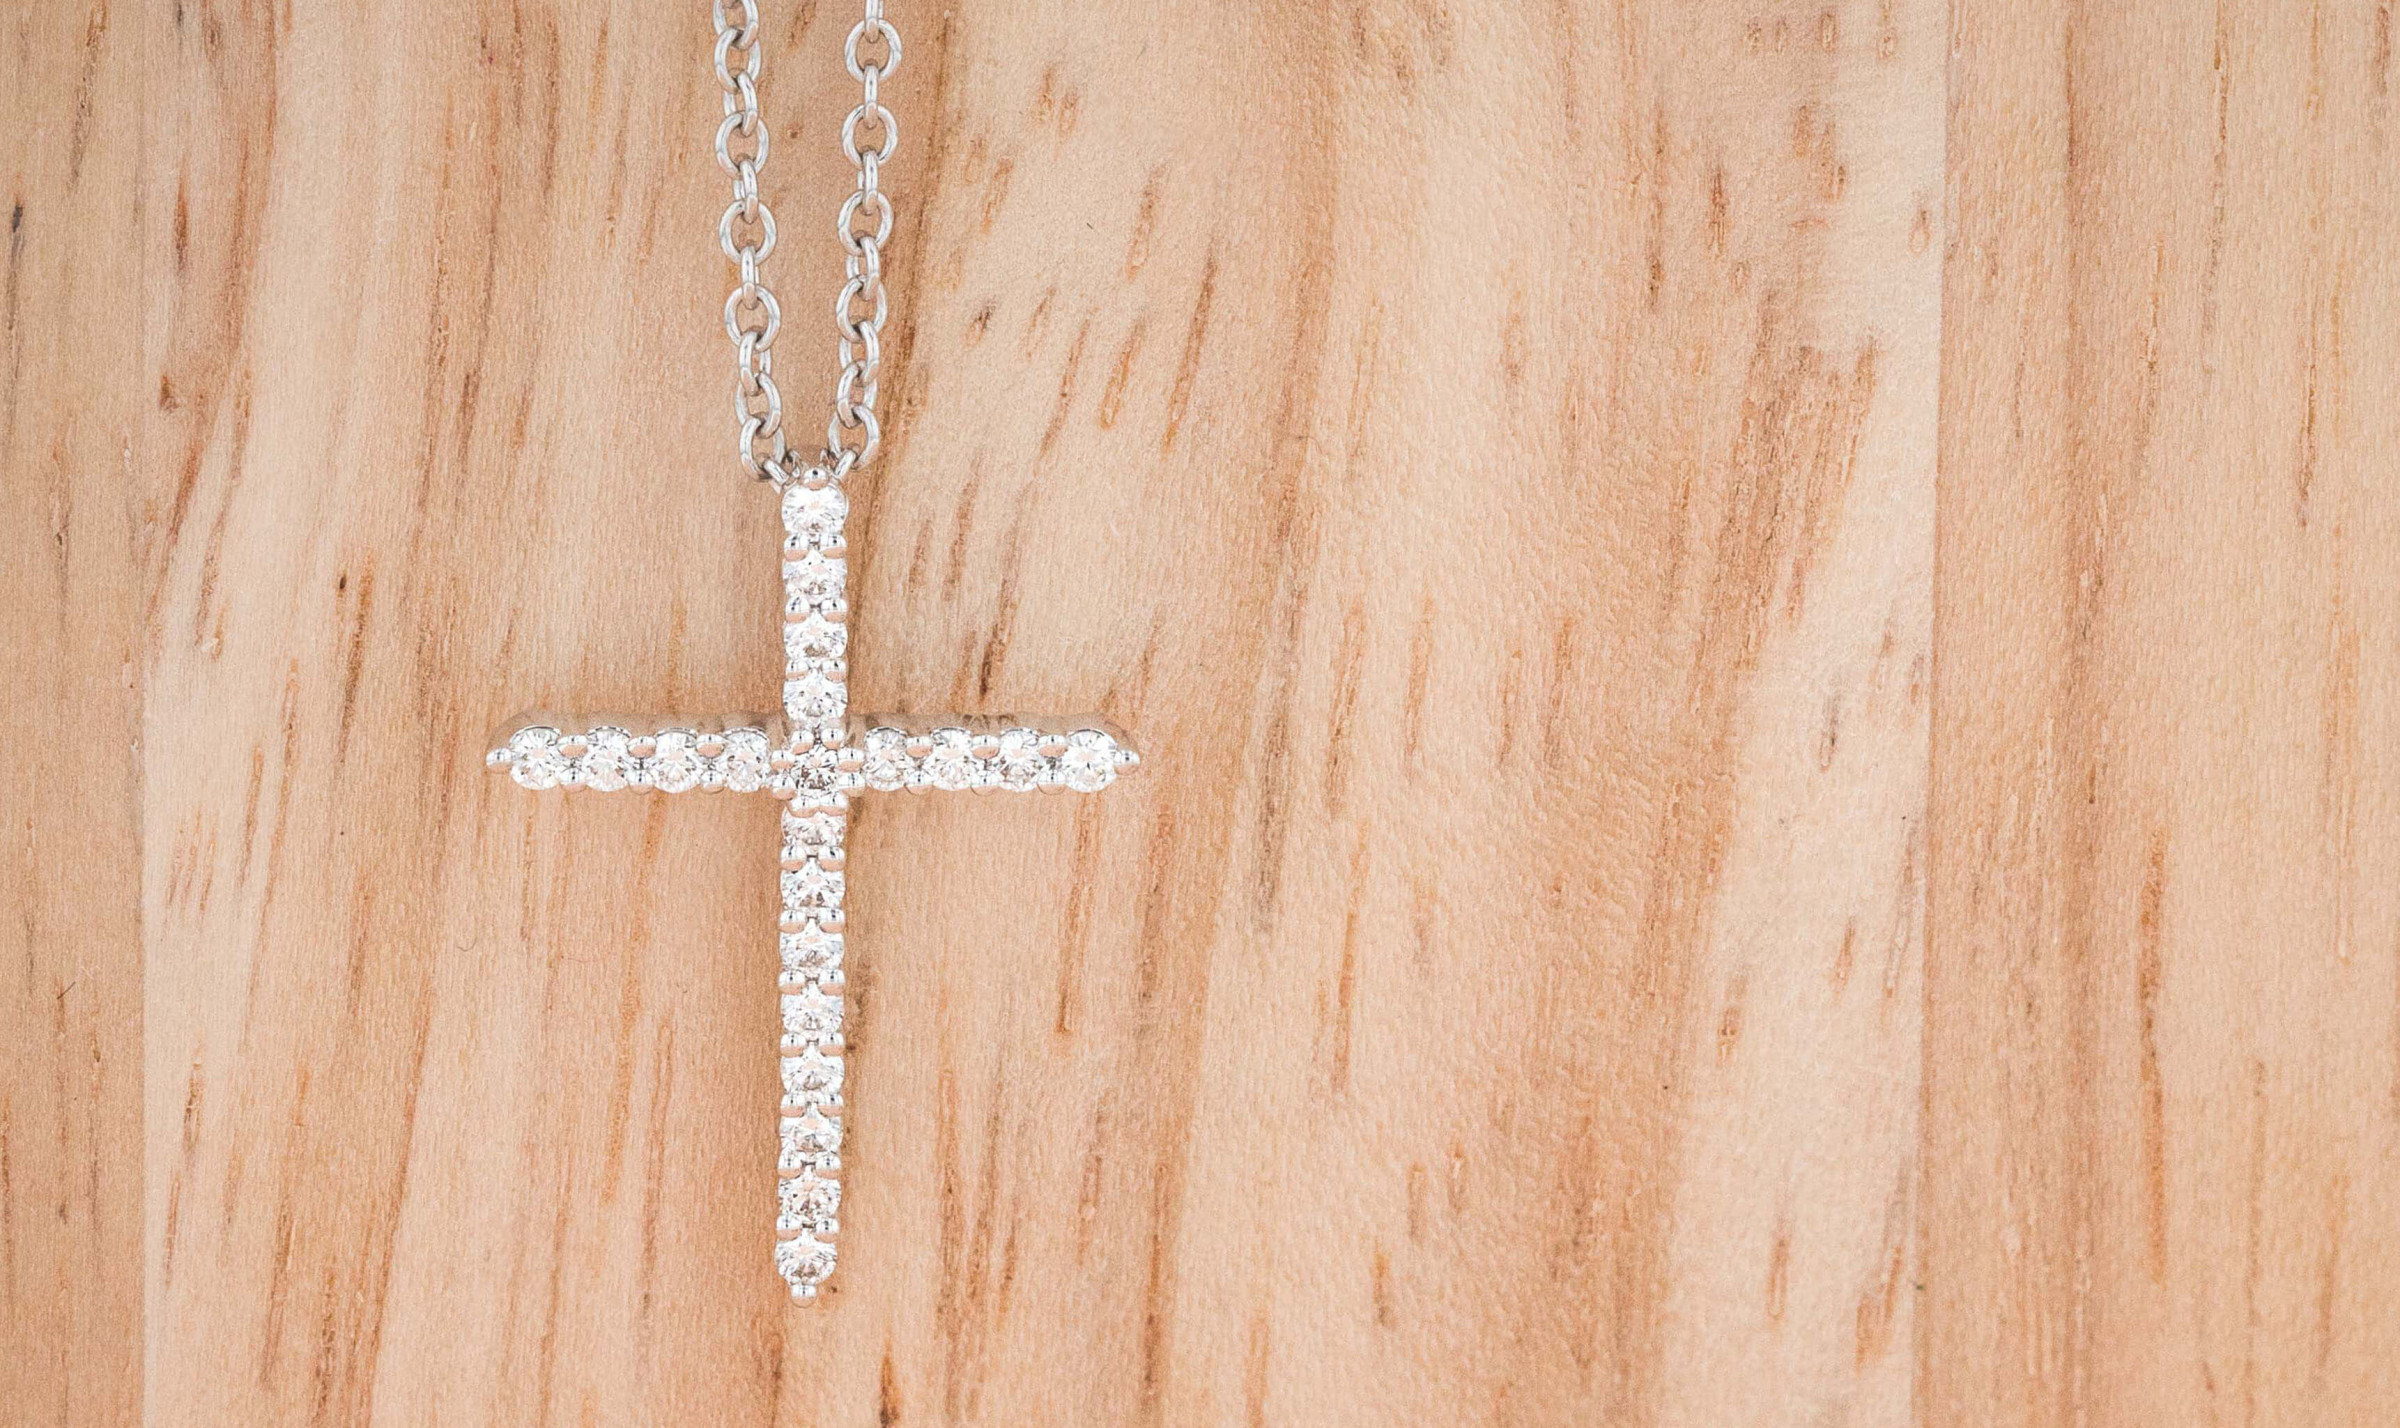 christening gift ideas: a cross necklace